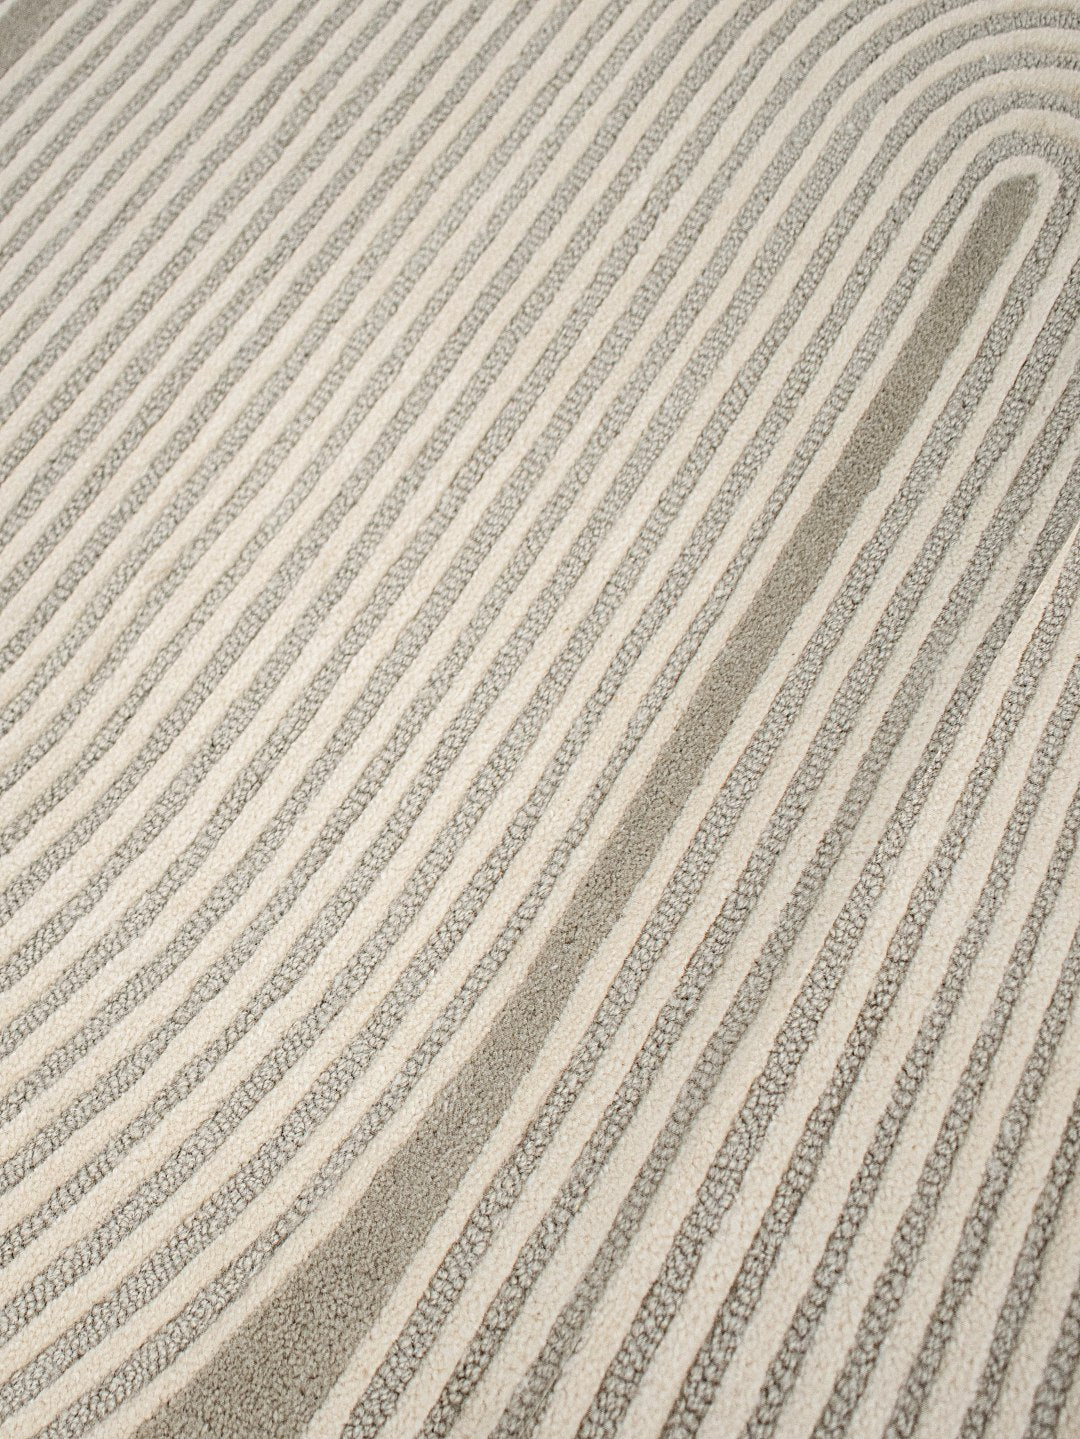 Viper rug - The Rug Collection